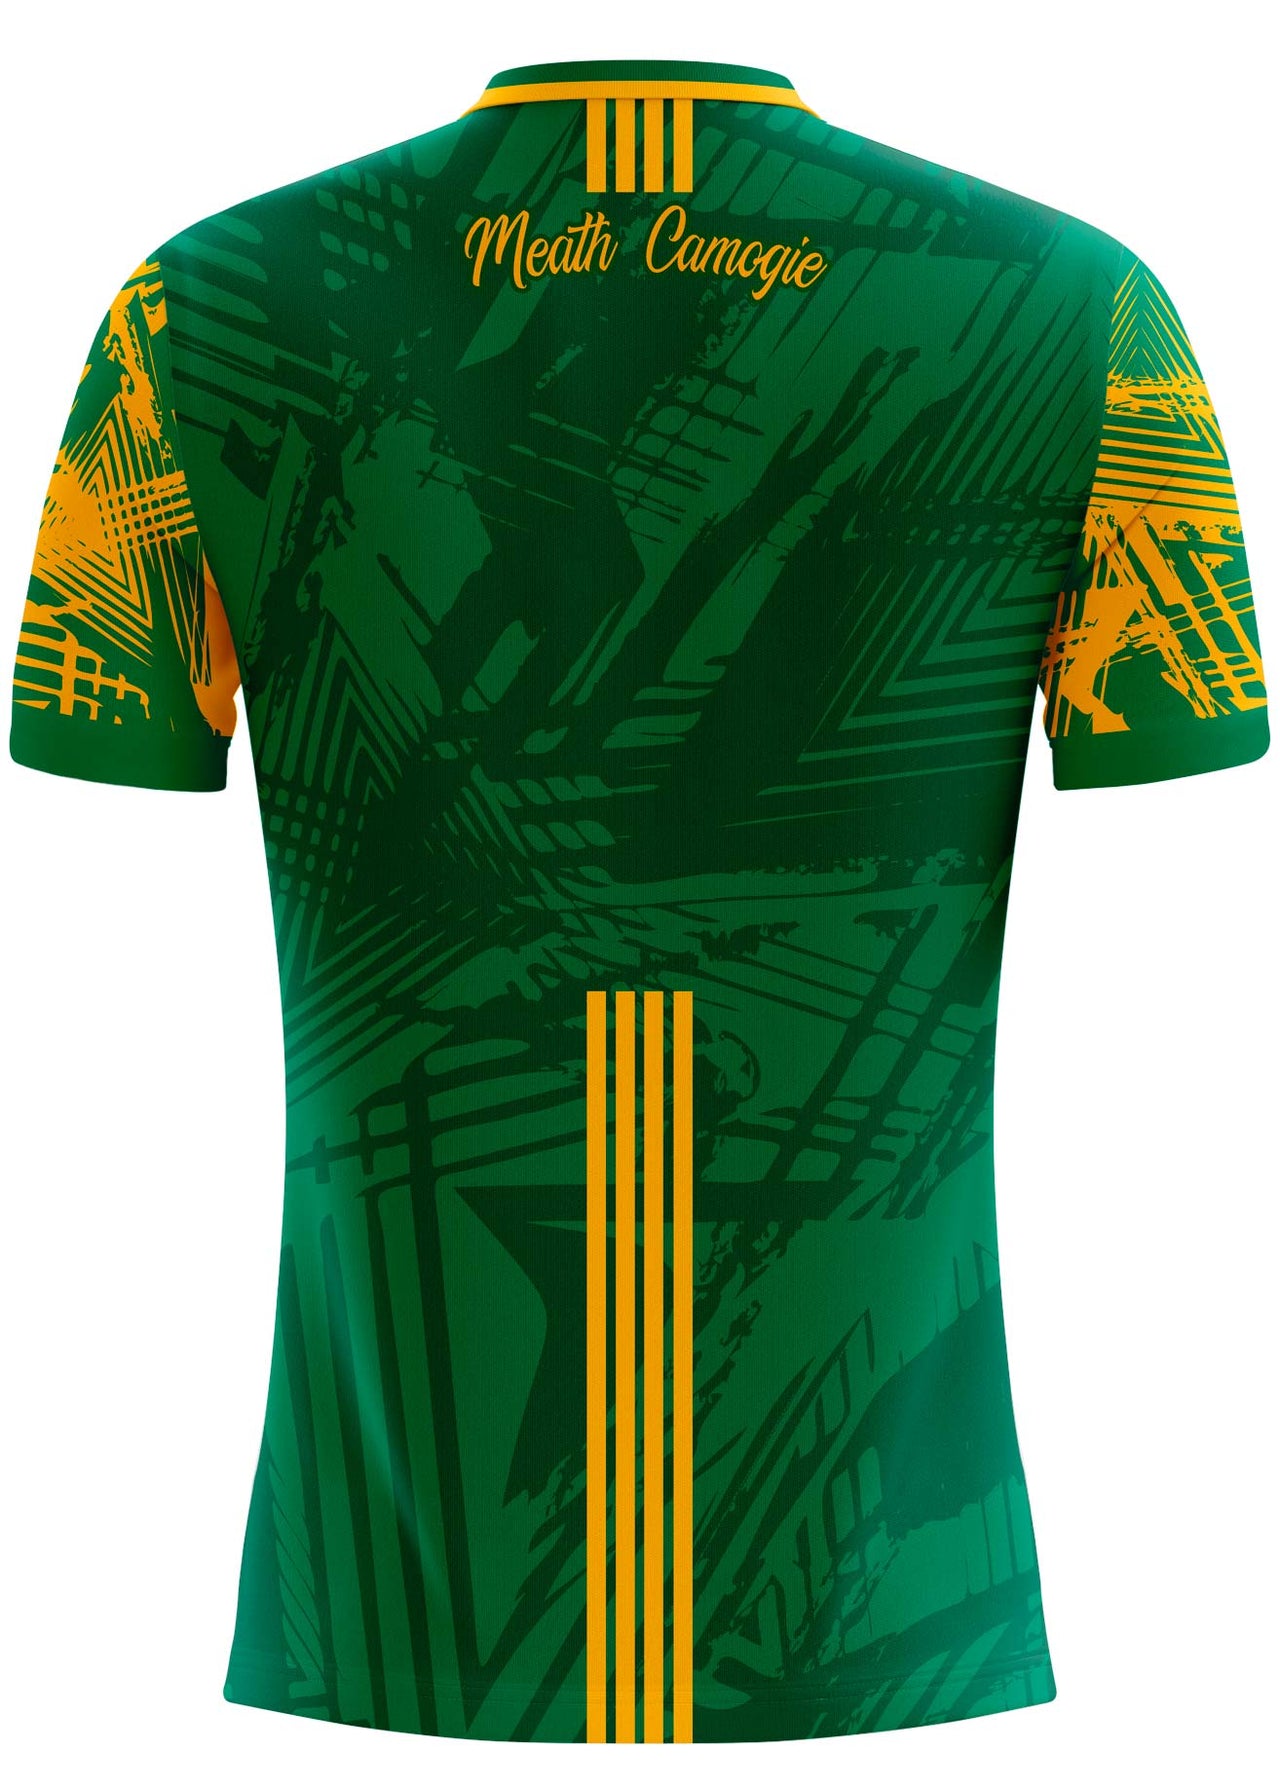 Meath Camogie Home Jersey Regular Fit Adult